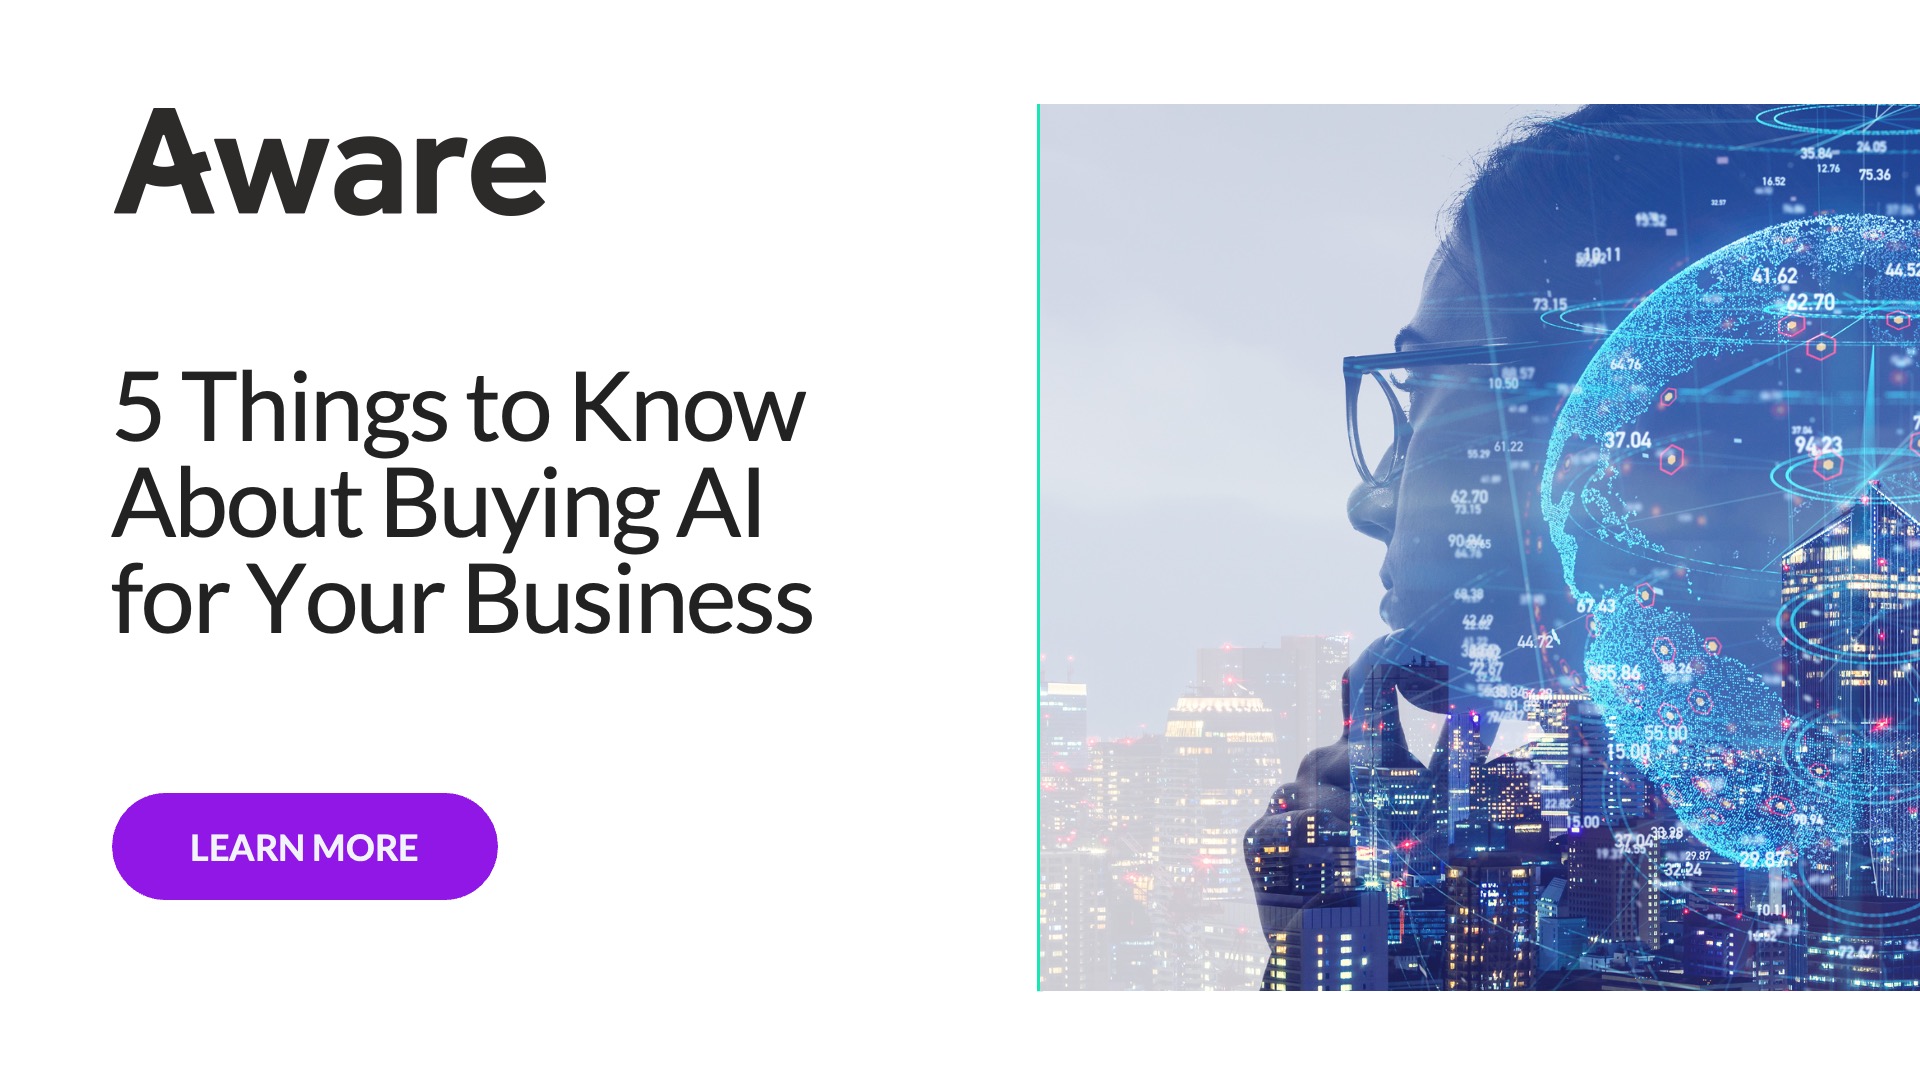 5 Things to Know About Buying AI for Your Business